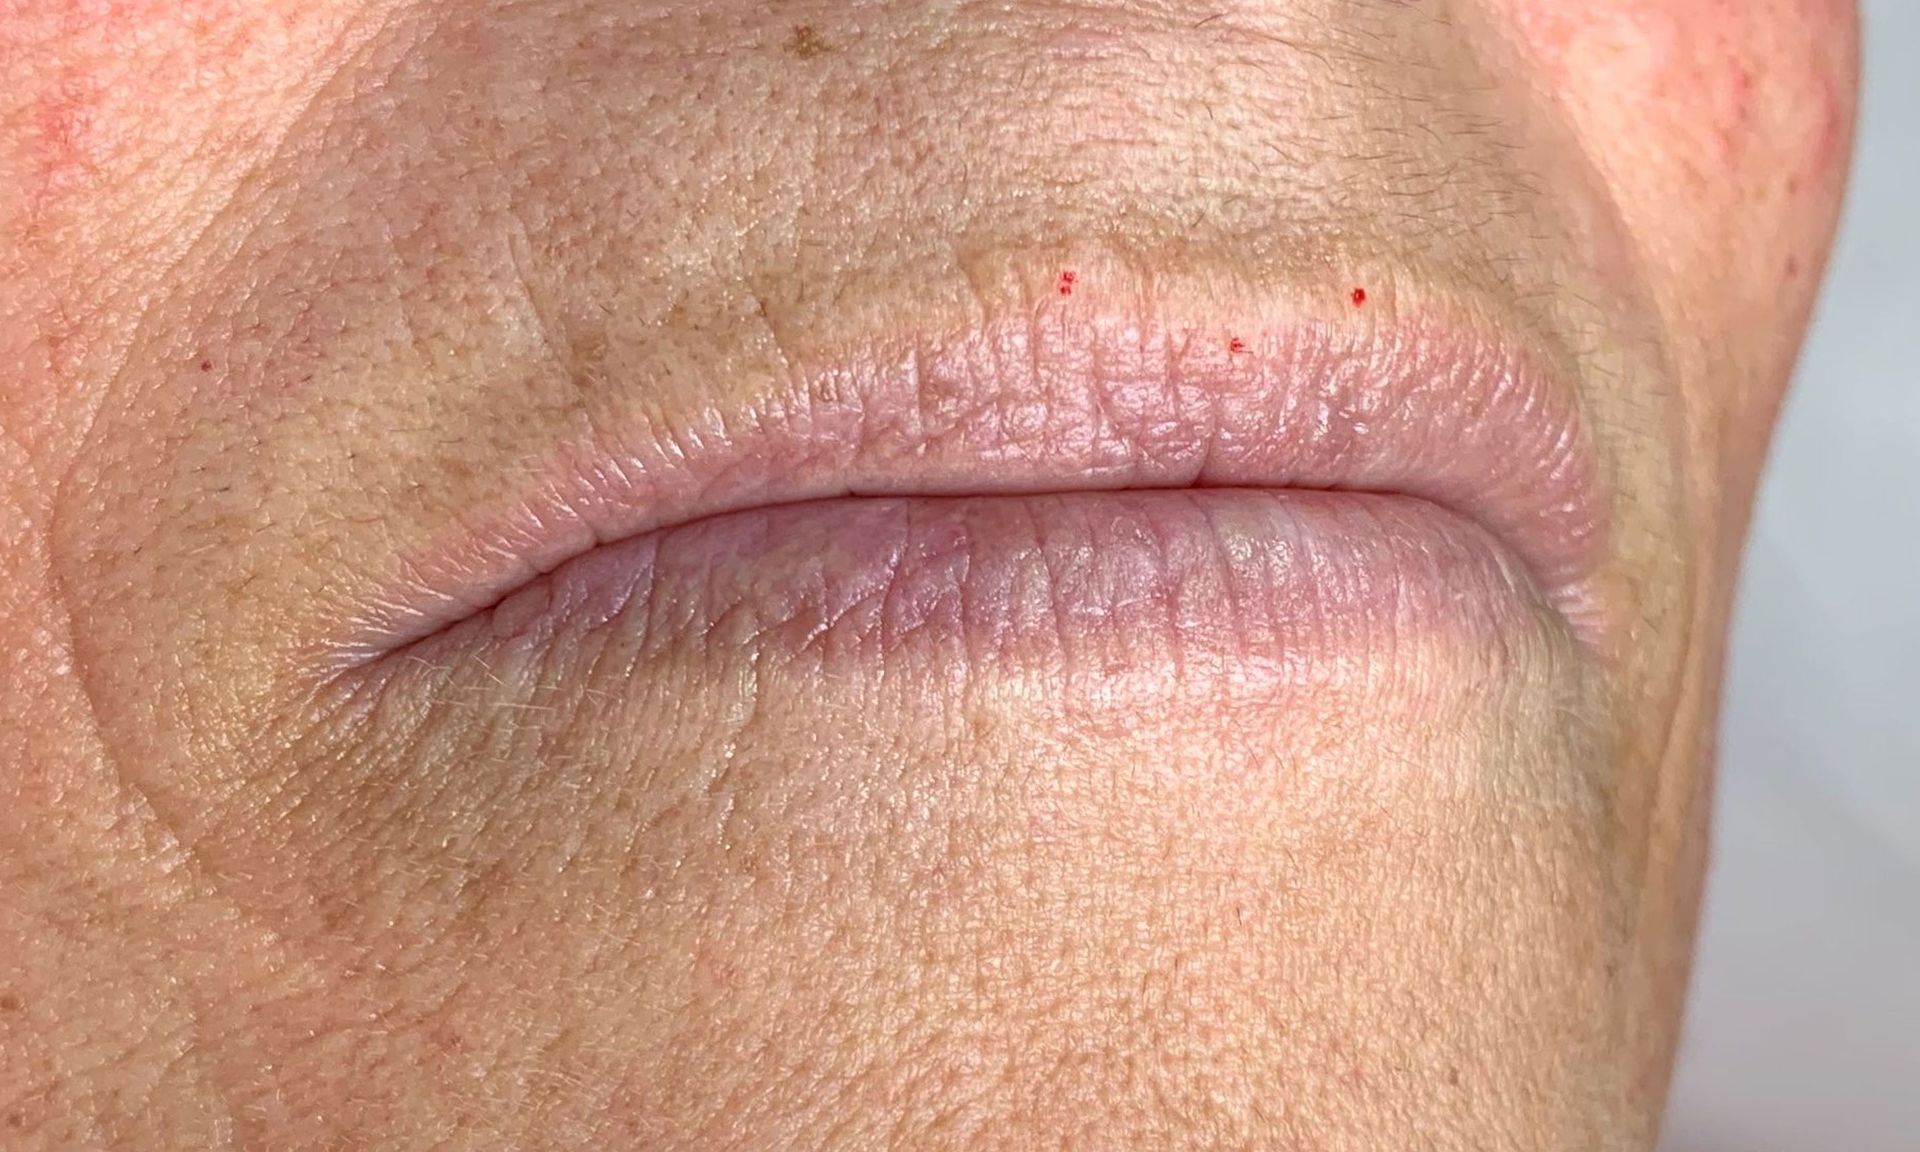 A close up of an elderly woman 's lips with wrinkles.